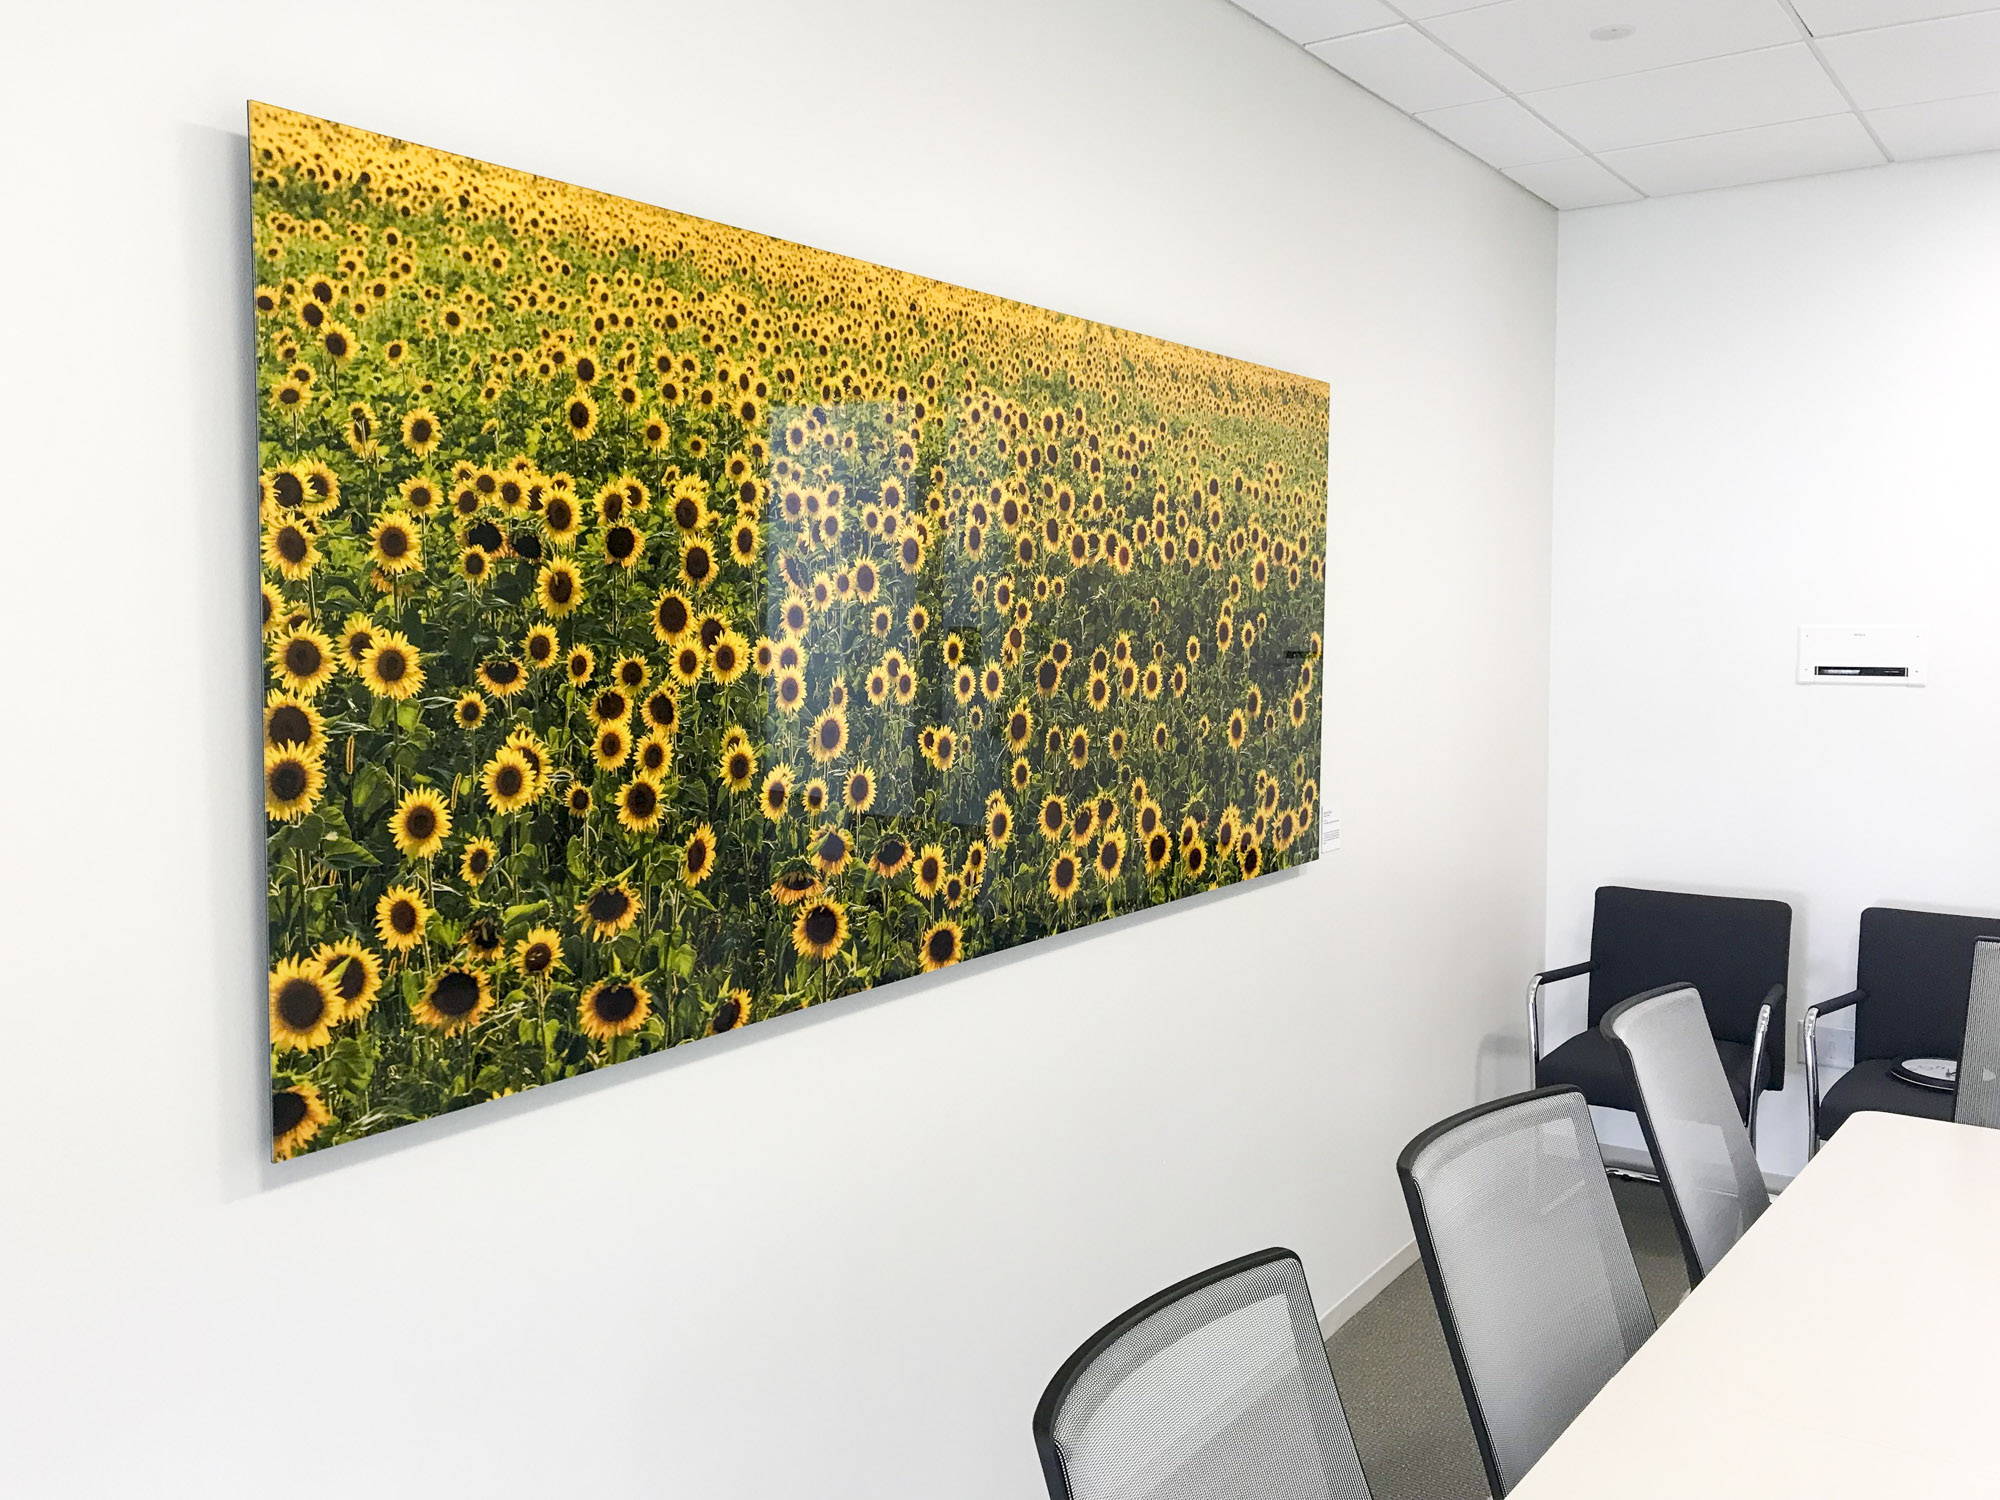 Large format gigapixel photograph in an office conference room